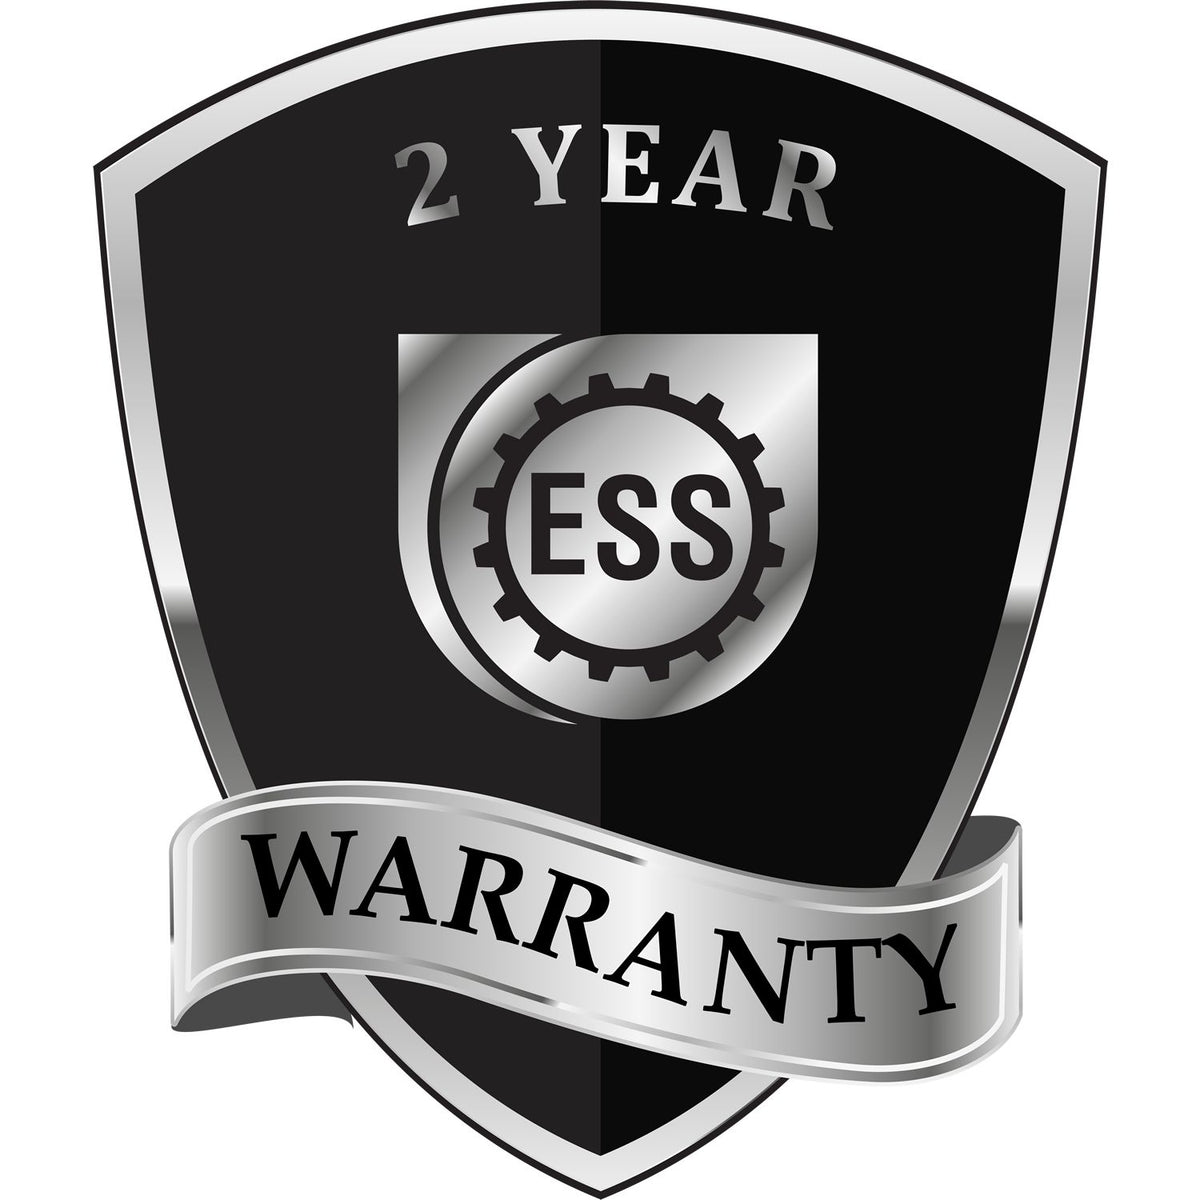 A black and silver badge or emblem showing warranty information for the Gift Maine Geologist Seal